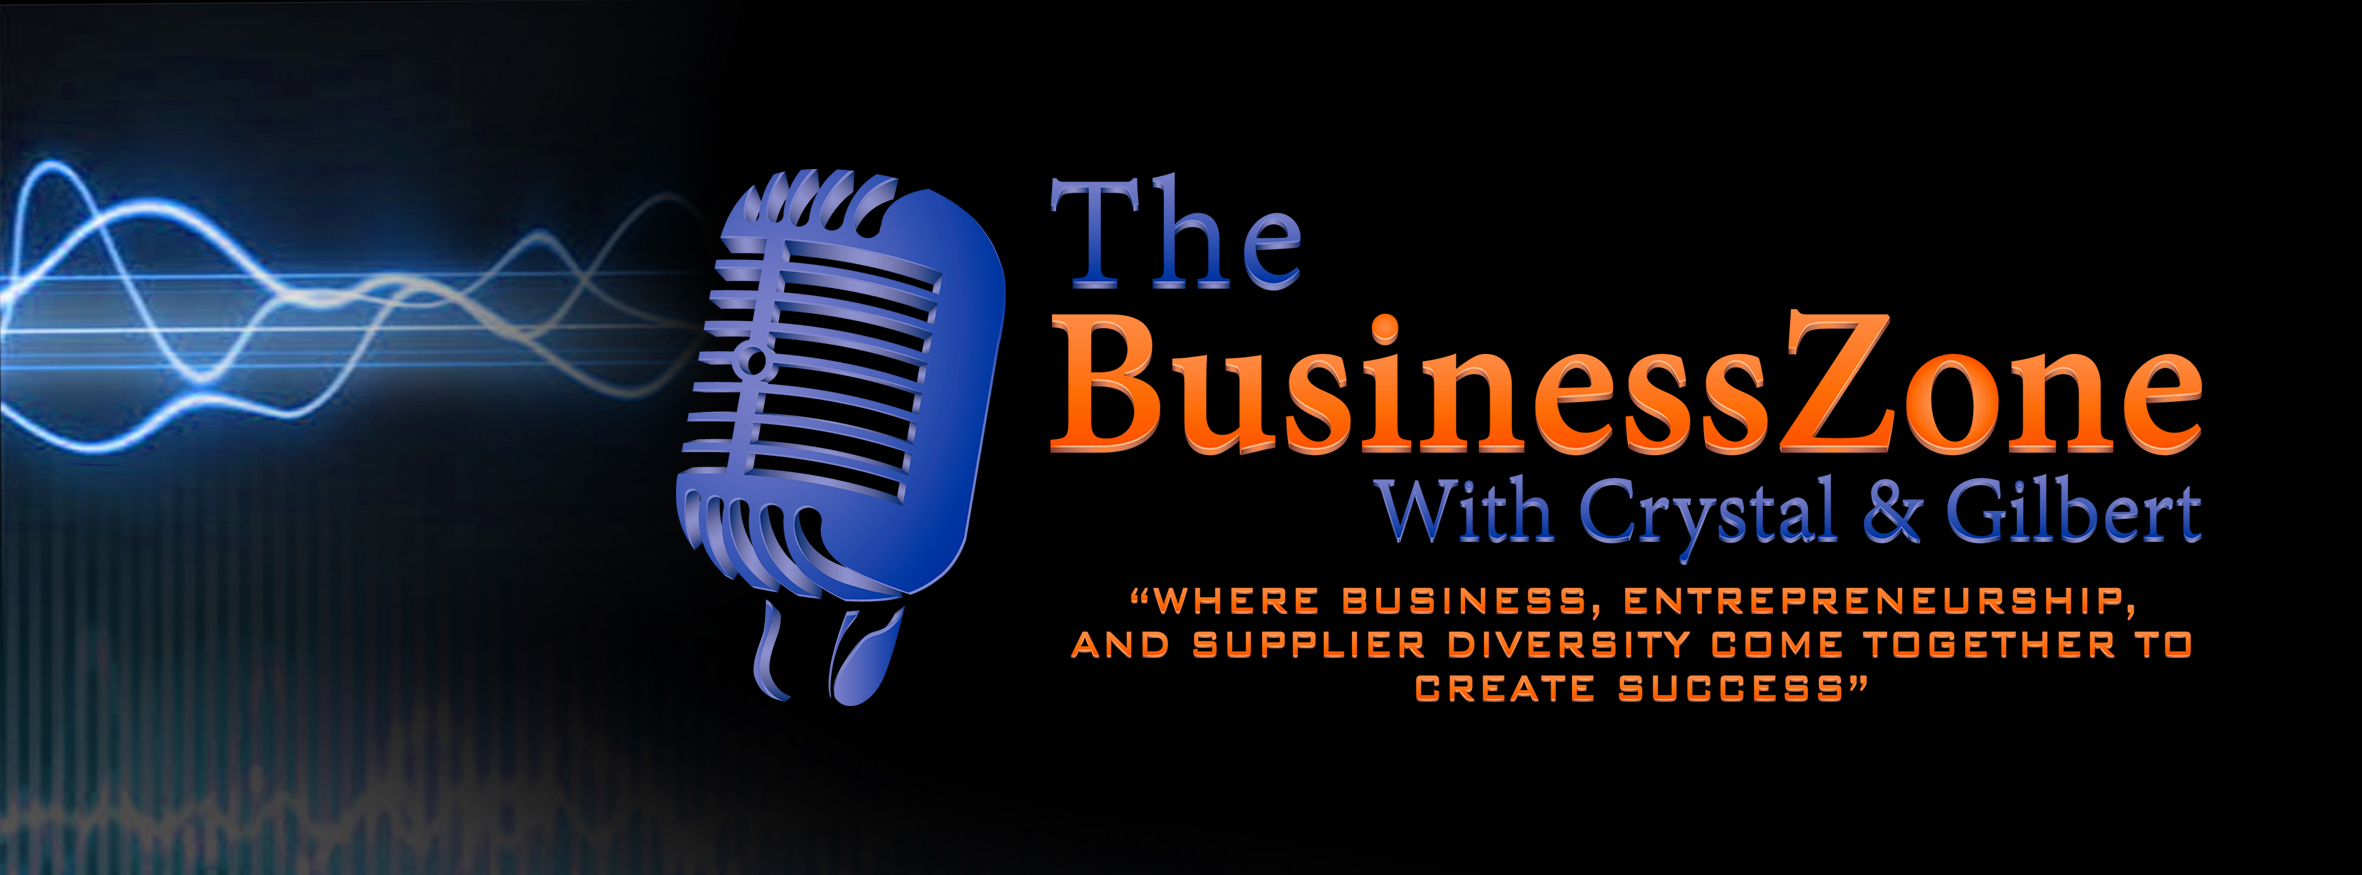 The Business Zone w/ Crystal & Gilbert - PATENTS, TRADEMARKS AND COPYRIGHTS 7/22/16 